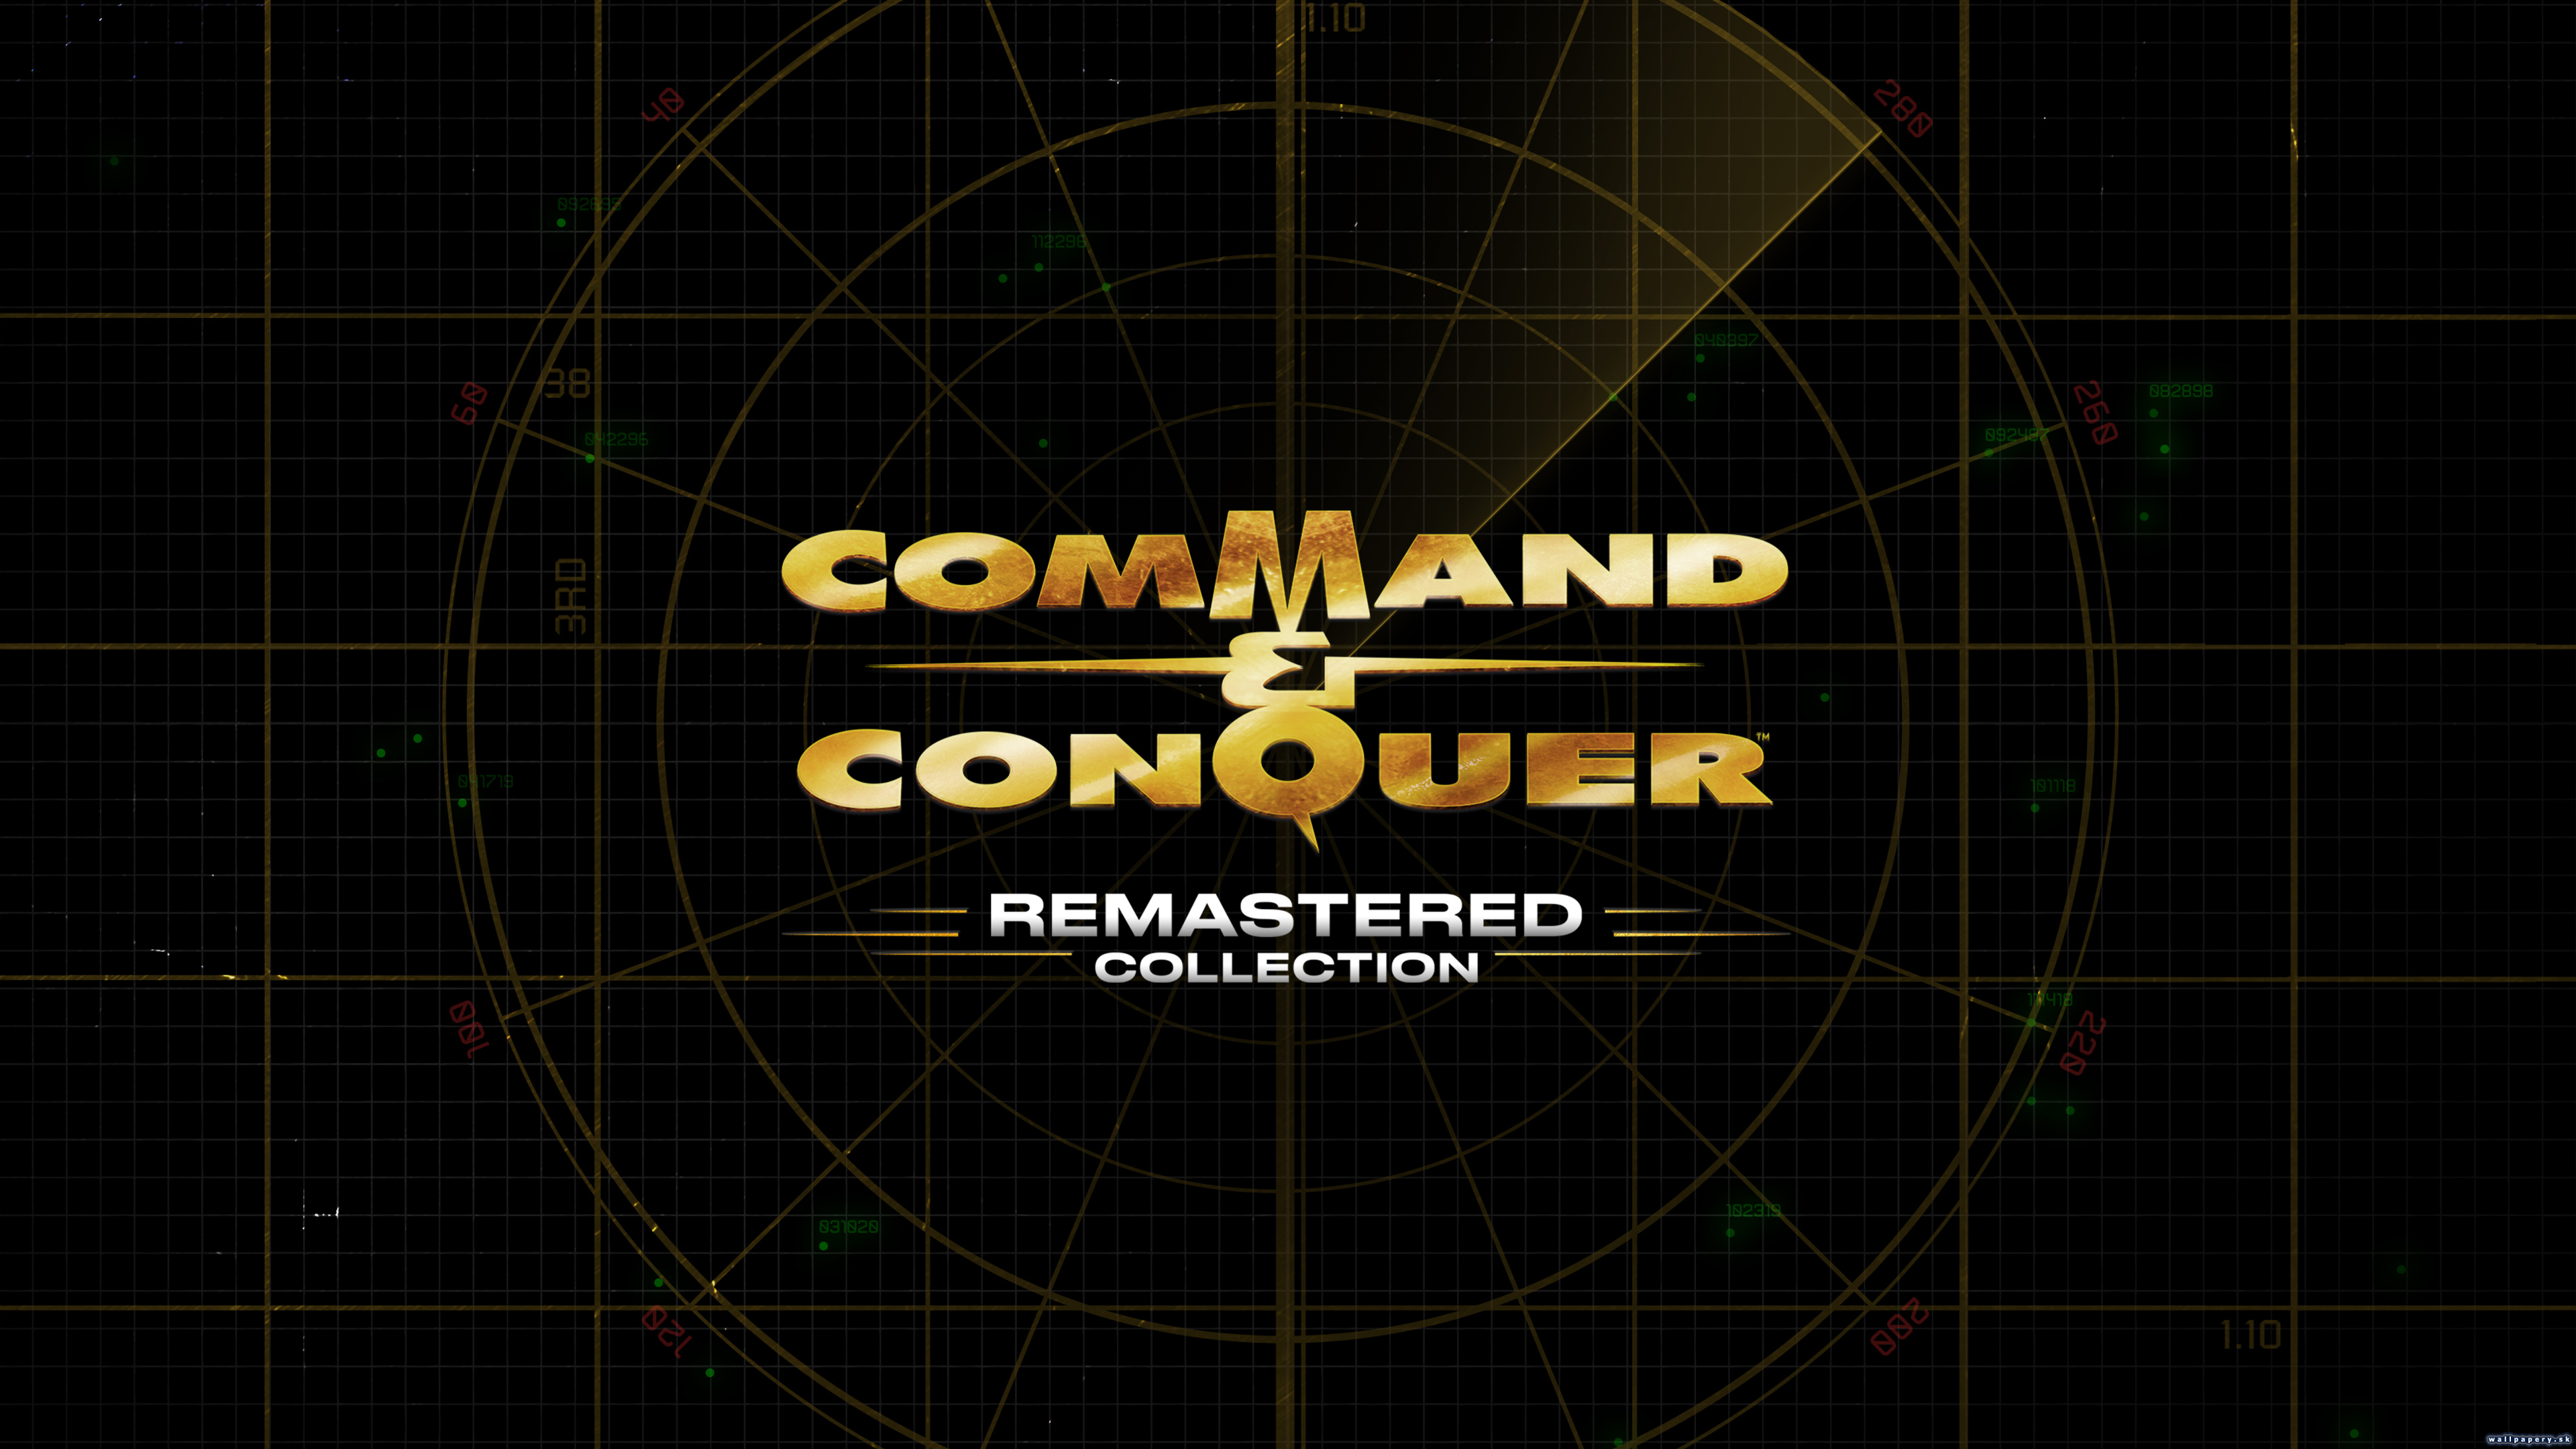 Command & Conquer: Remastered Collection - wallpaper 2